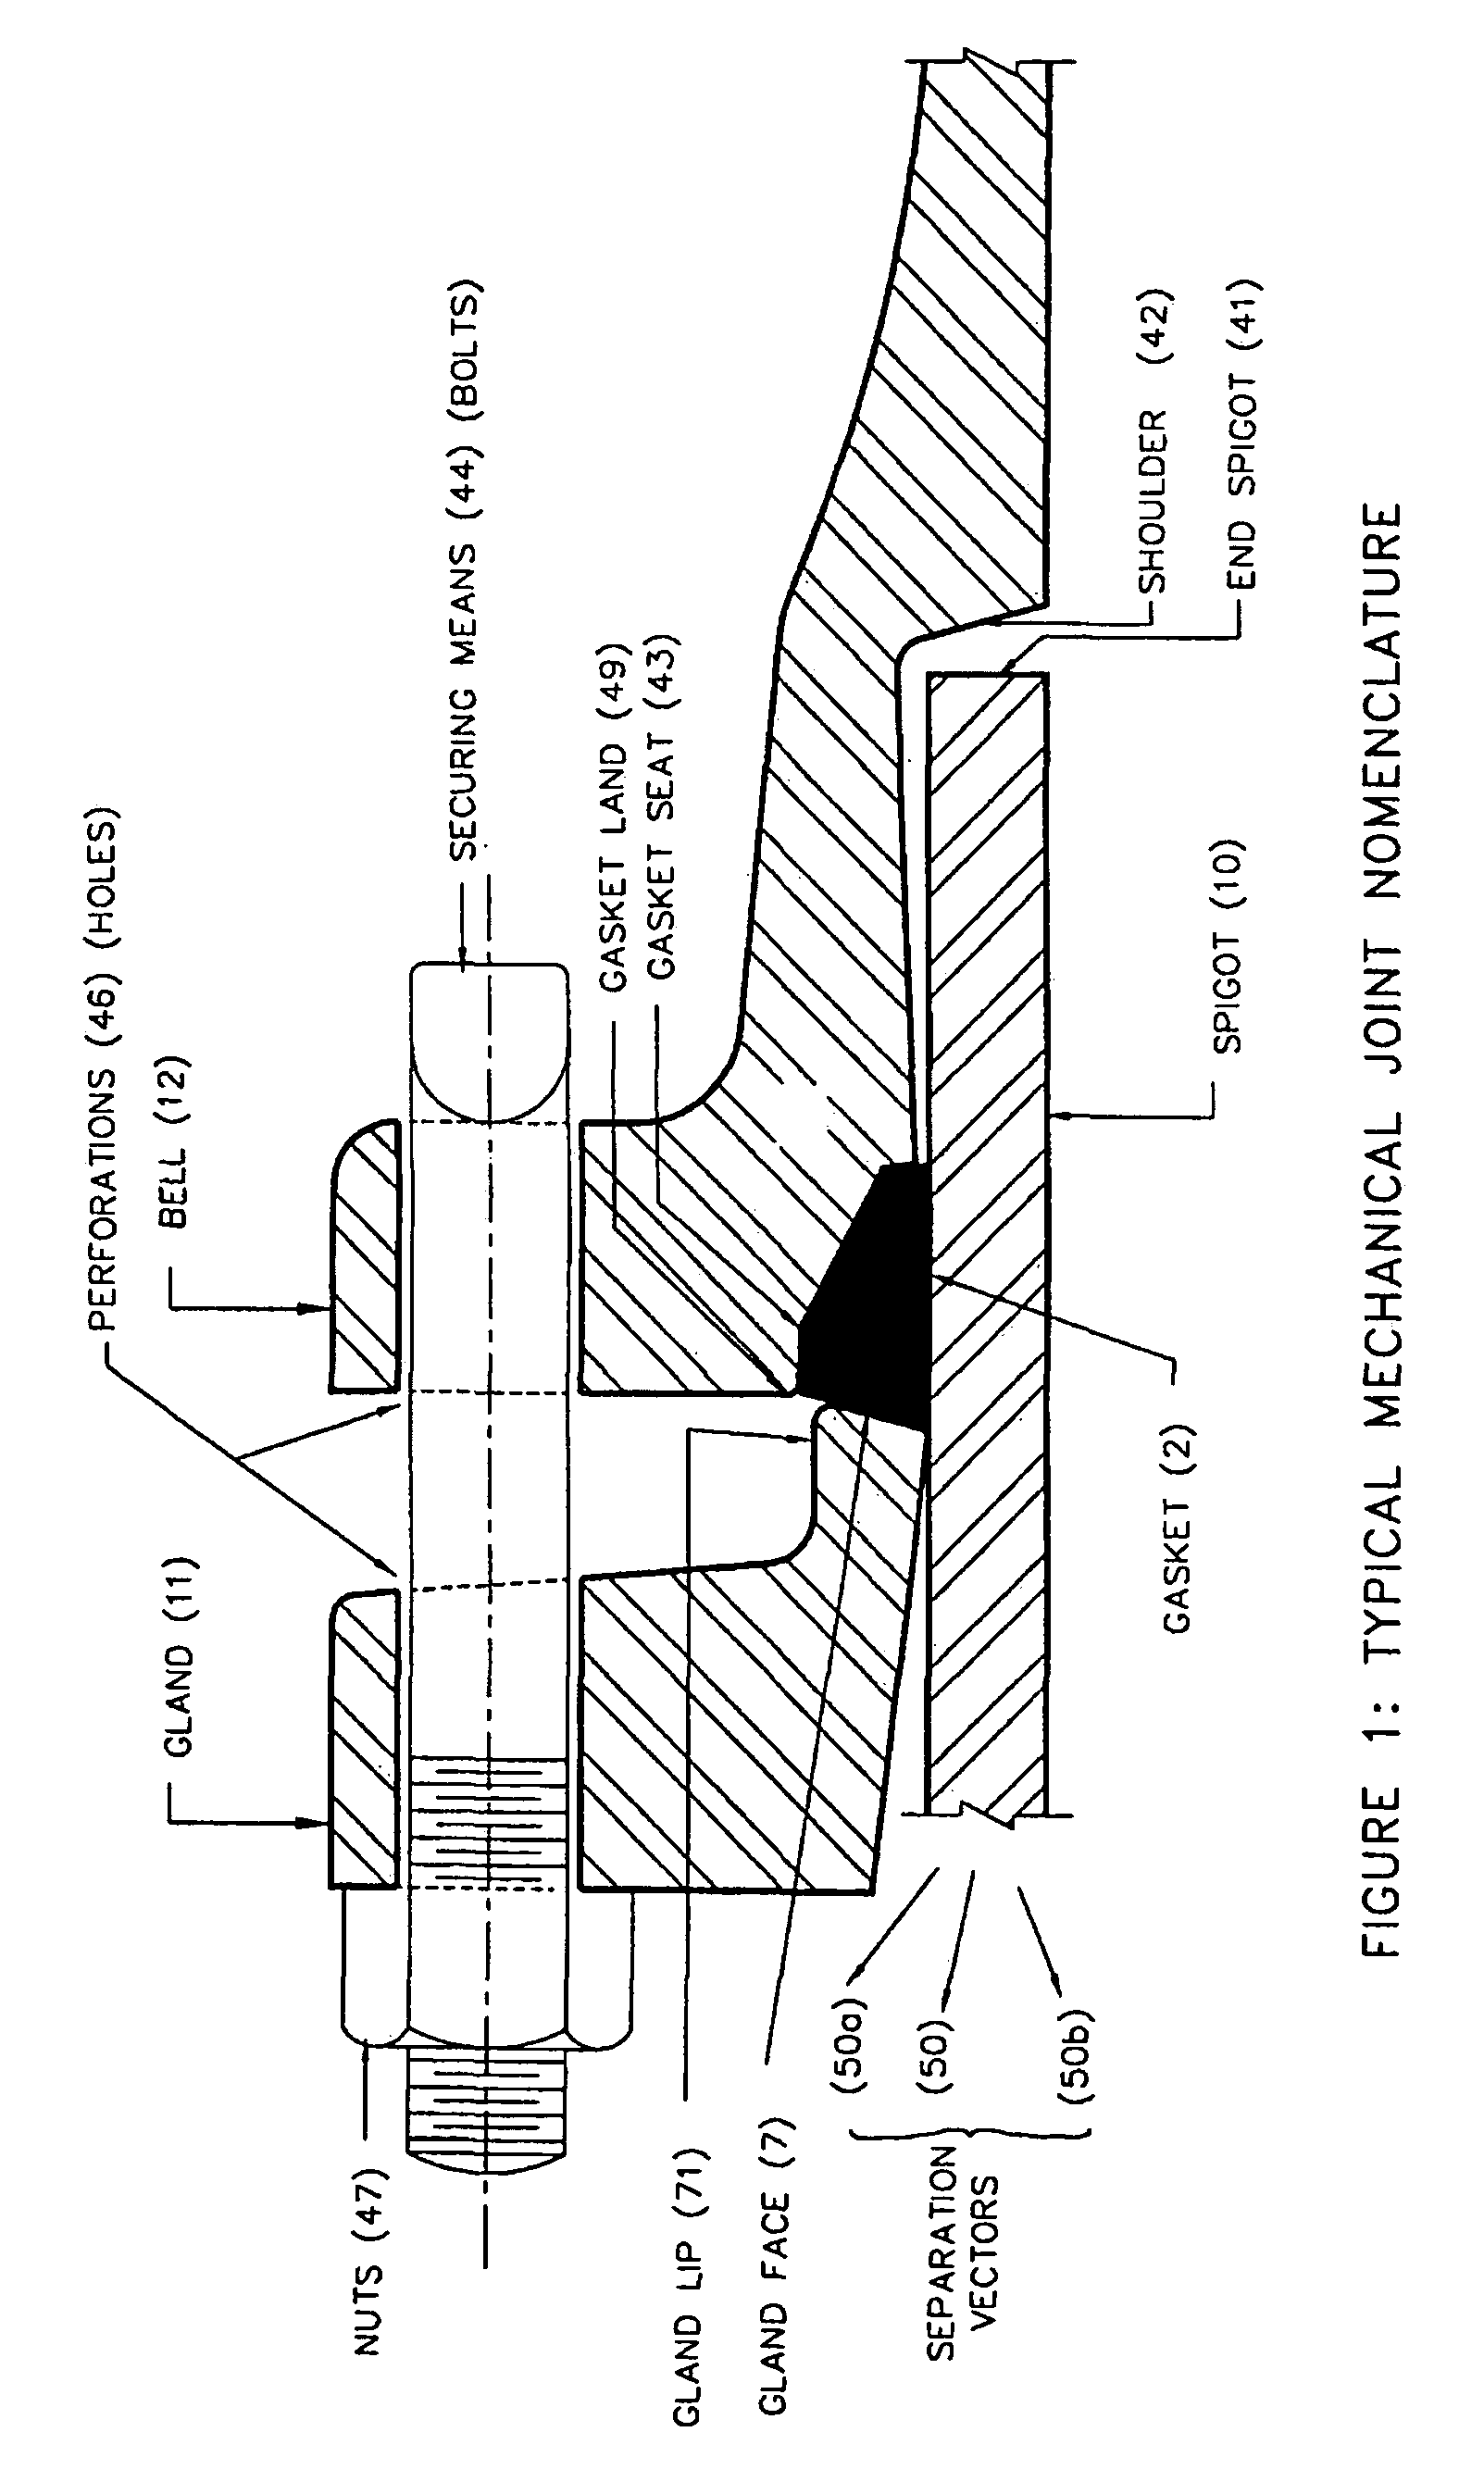 Energized restraining gasket for mechanical joints of pipes